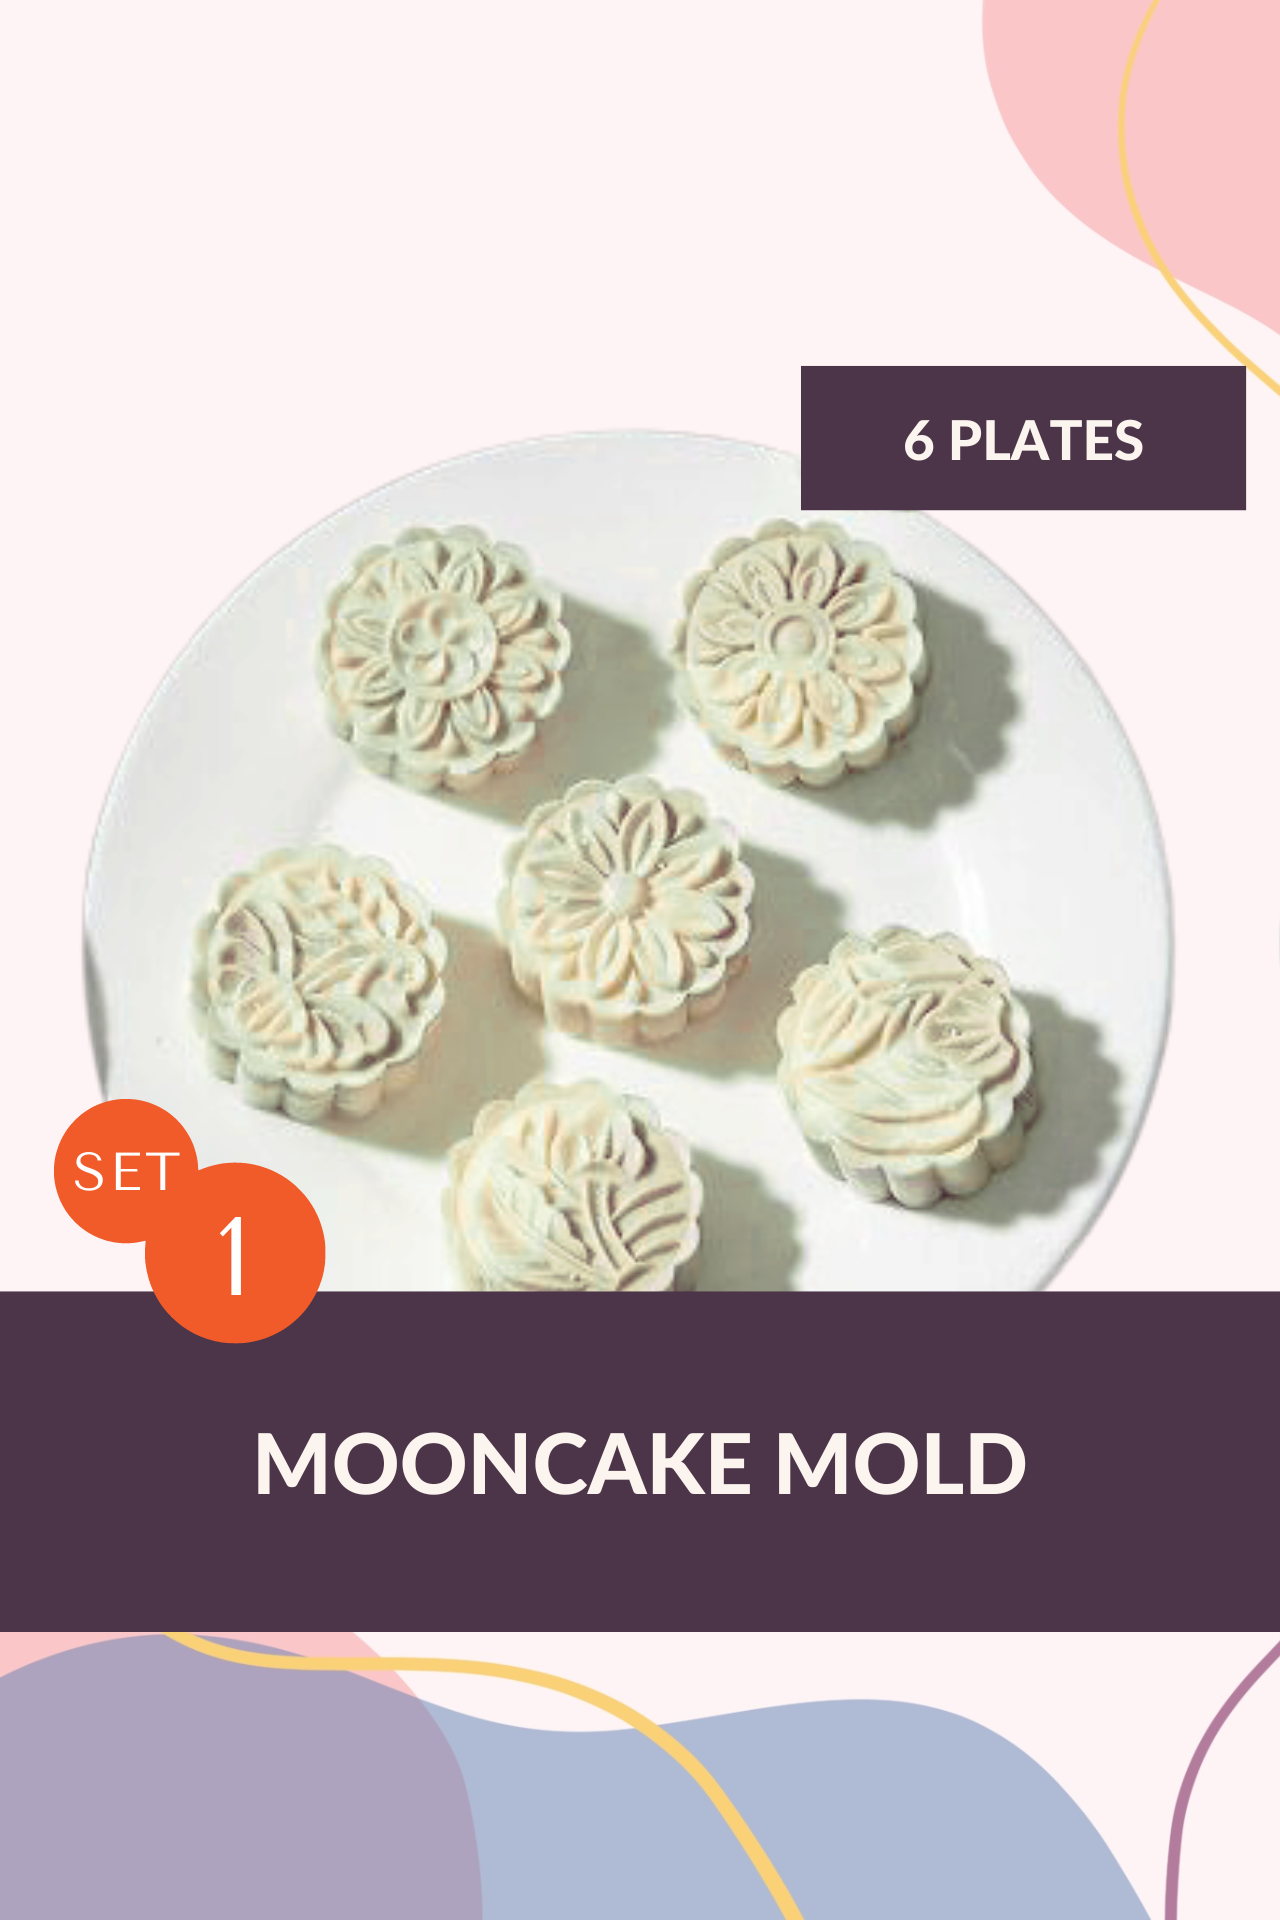 FEBWIND Plastic Mooncake Mold 100g/50g Cookie Cutter with Cookie Stamp  Chocolate Moon cake Mould Moon Cake Mold/Press Cookie 371 - AliExpress, Mooncake  Mold - valleyresorts.co.uk